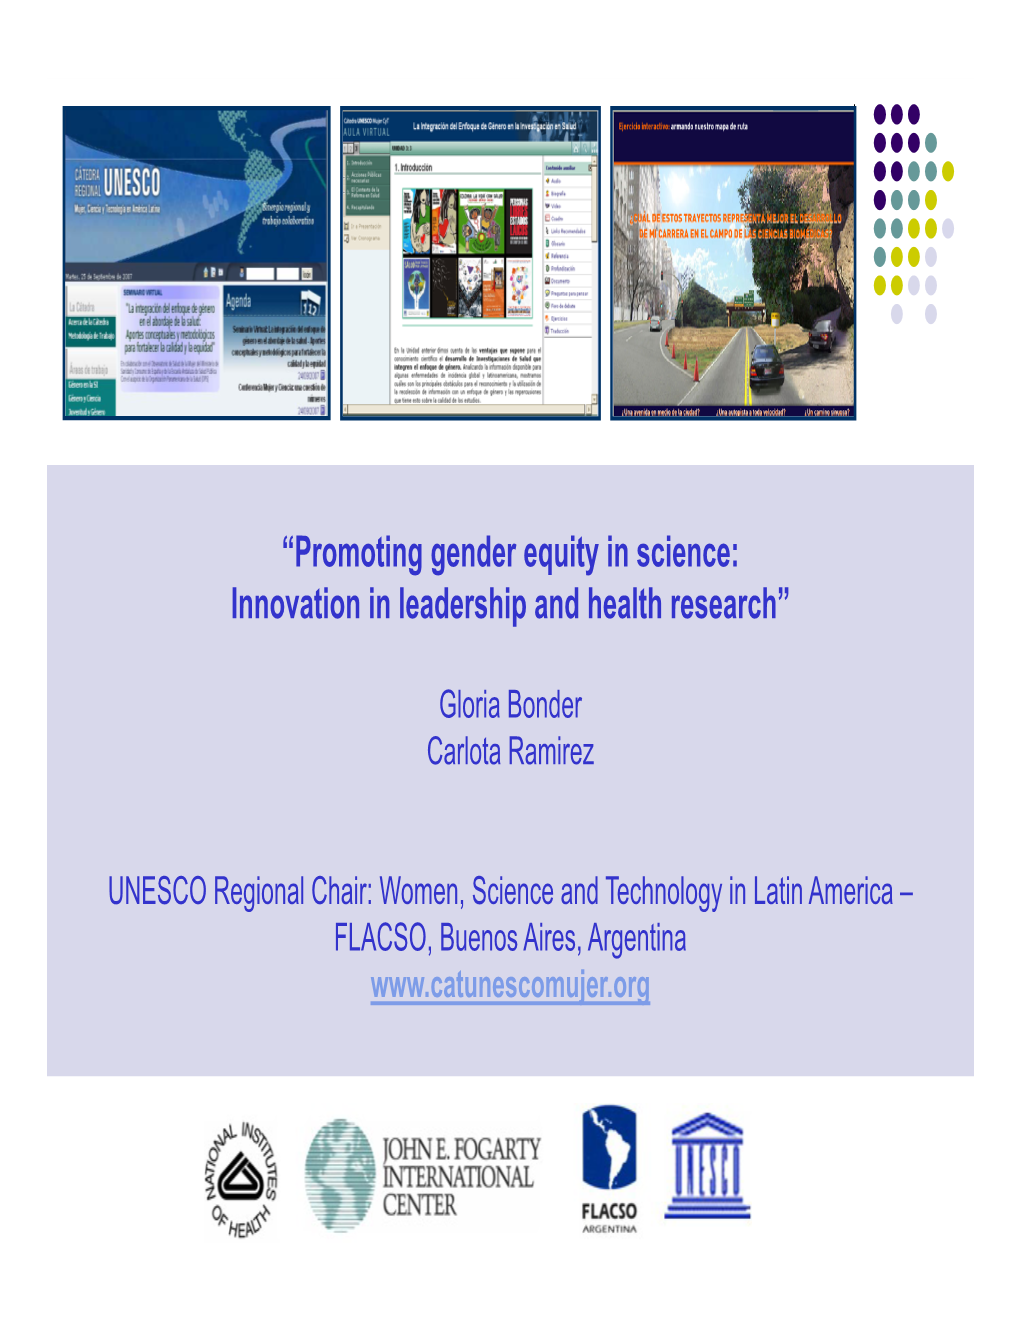 “Promoting Gender Equity in Science: Innovation in Leadership and Health Research”